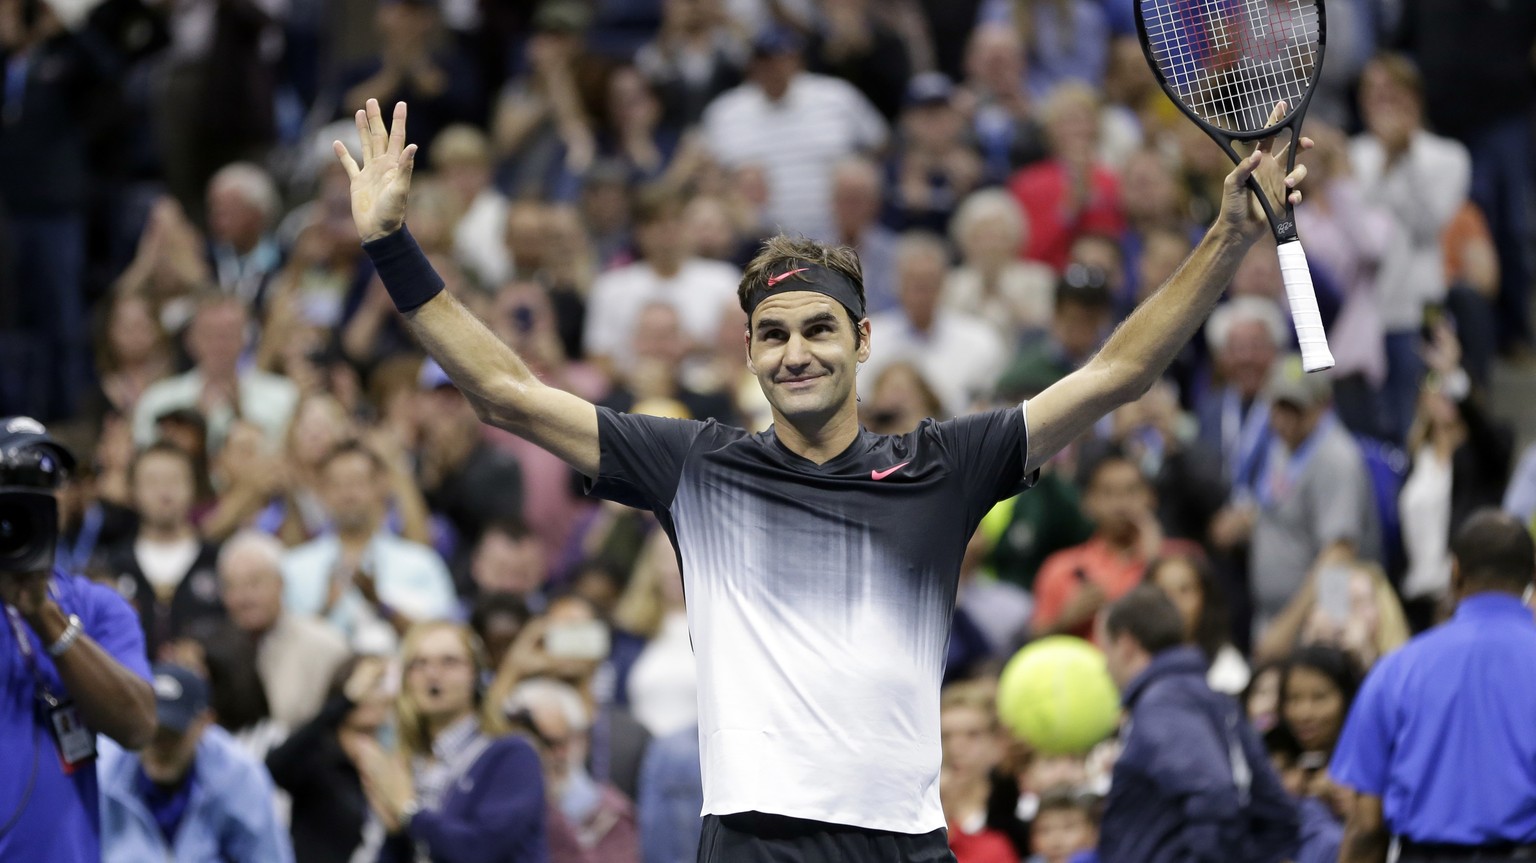 Roger Federer, of Switzerland, gestures to the crowd after defeating Feliciano Lopez, of Spain, during the U.S. Open tennis tournament in New York, Saturday, Sept. 2, 2017. (AP Photo/Seth Wenig)